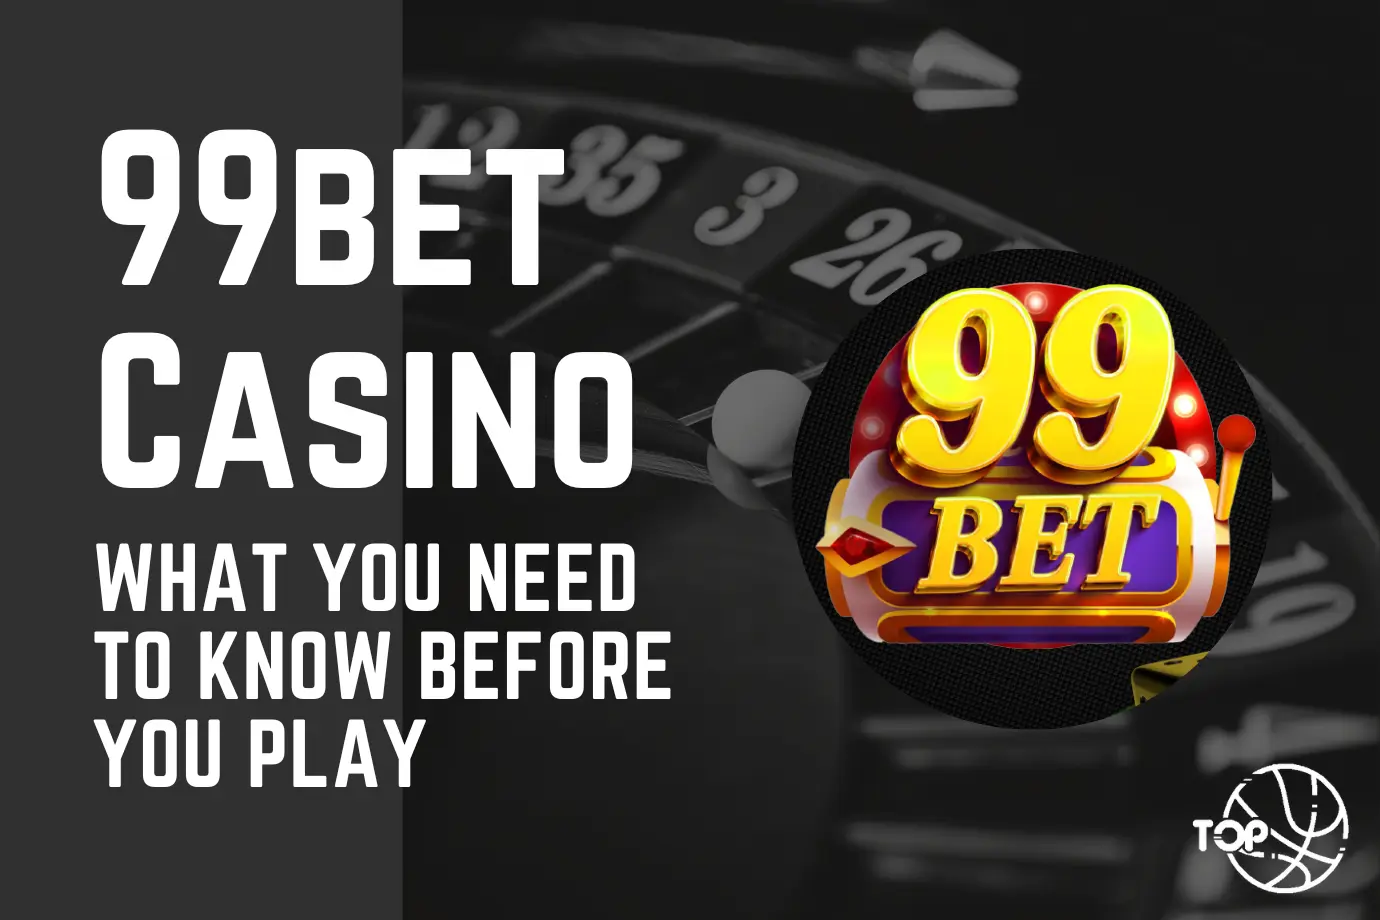 99bet Casino: What You Need to Know Before You Play